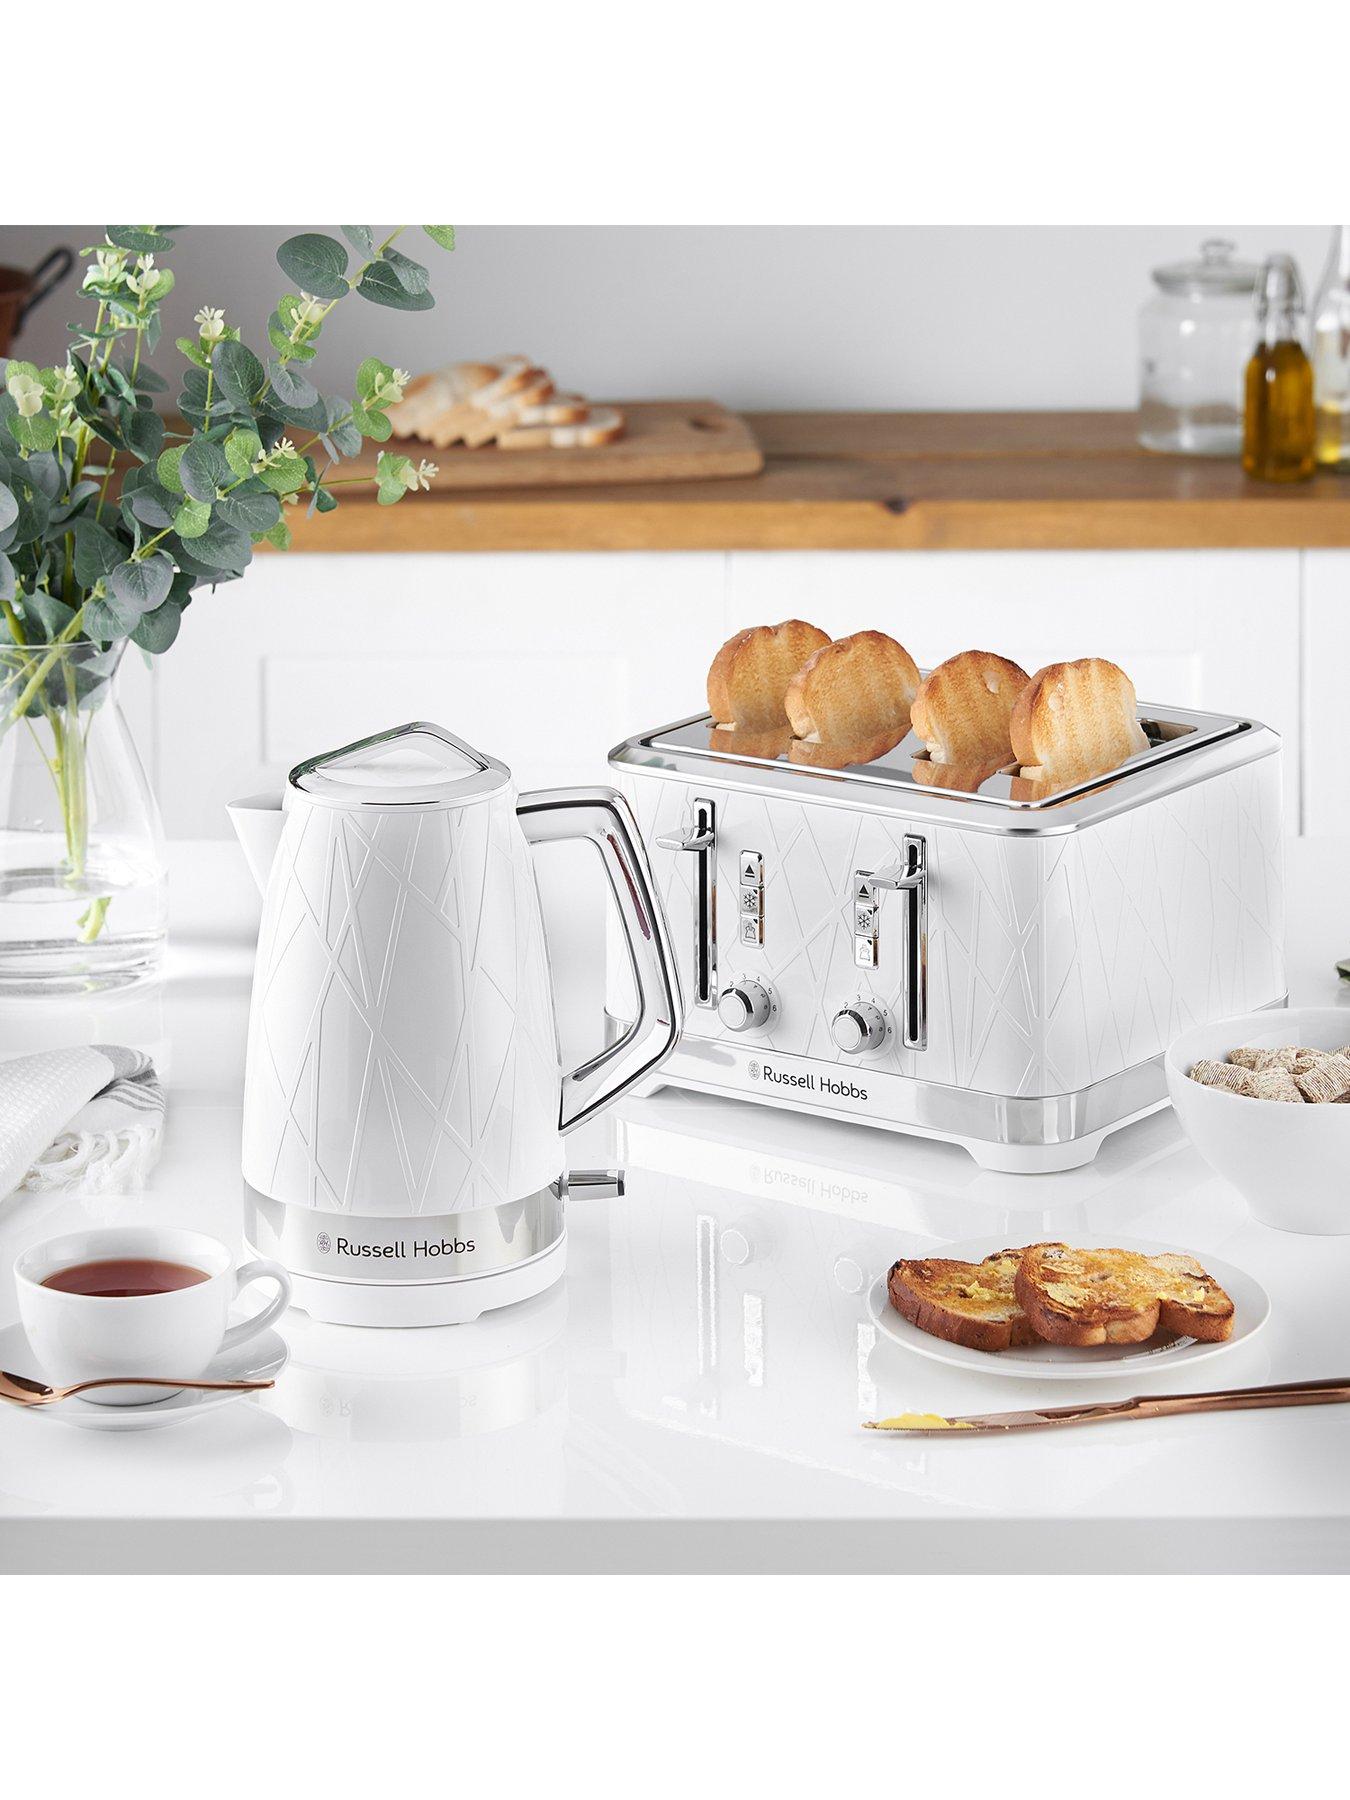 Retail Therapy Online - Russell Hobbs Limited Edition on Sale! 40